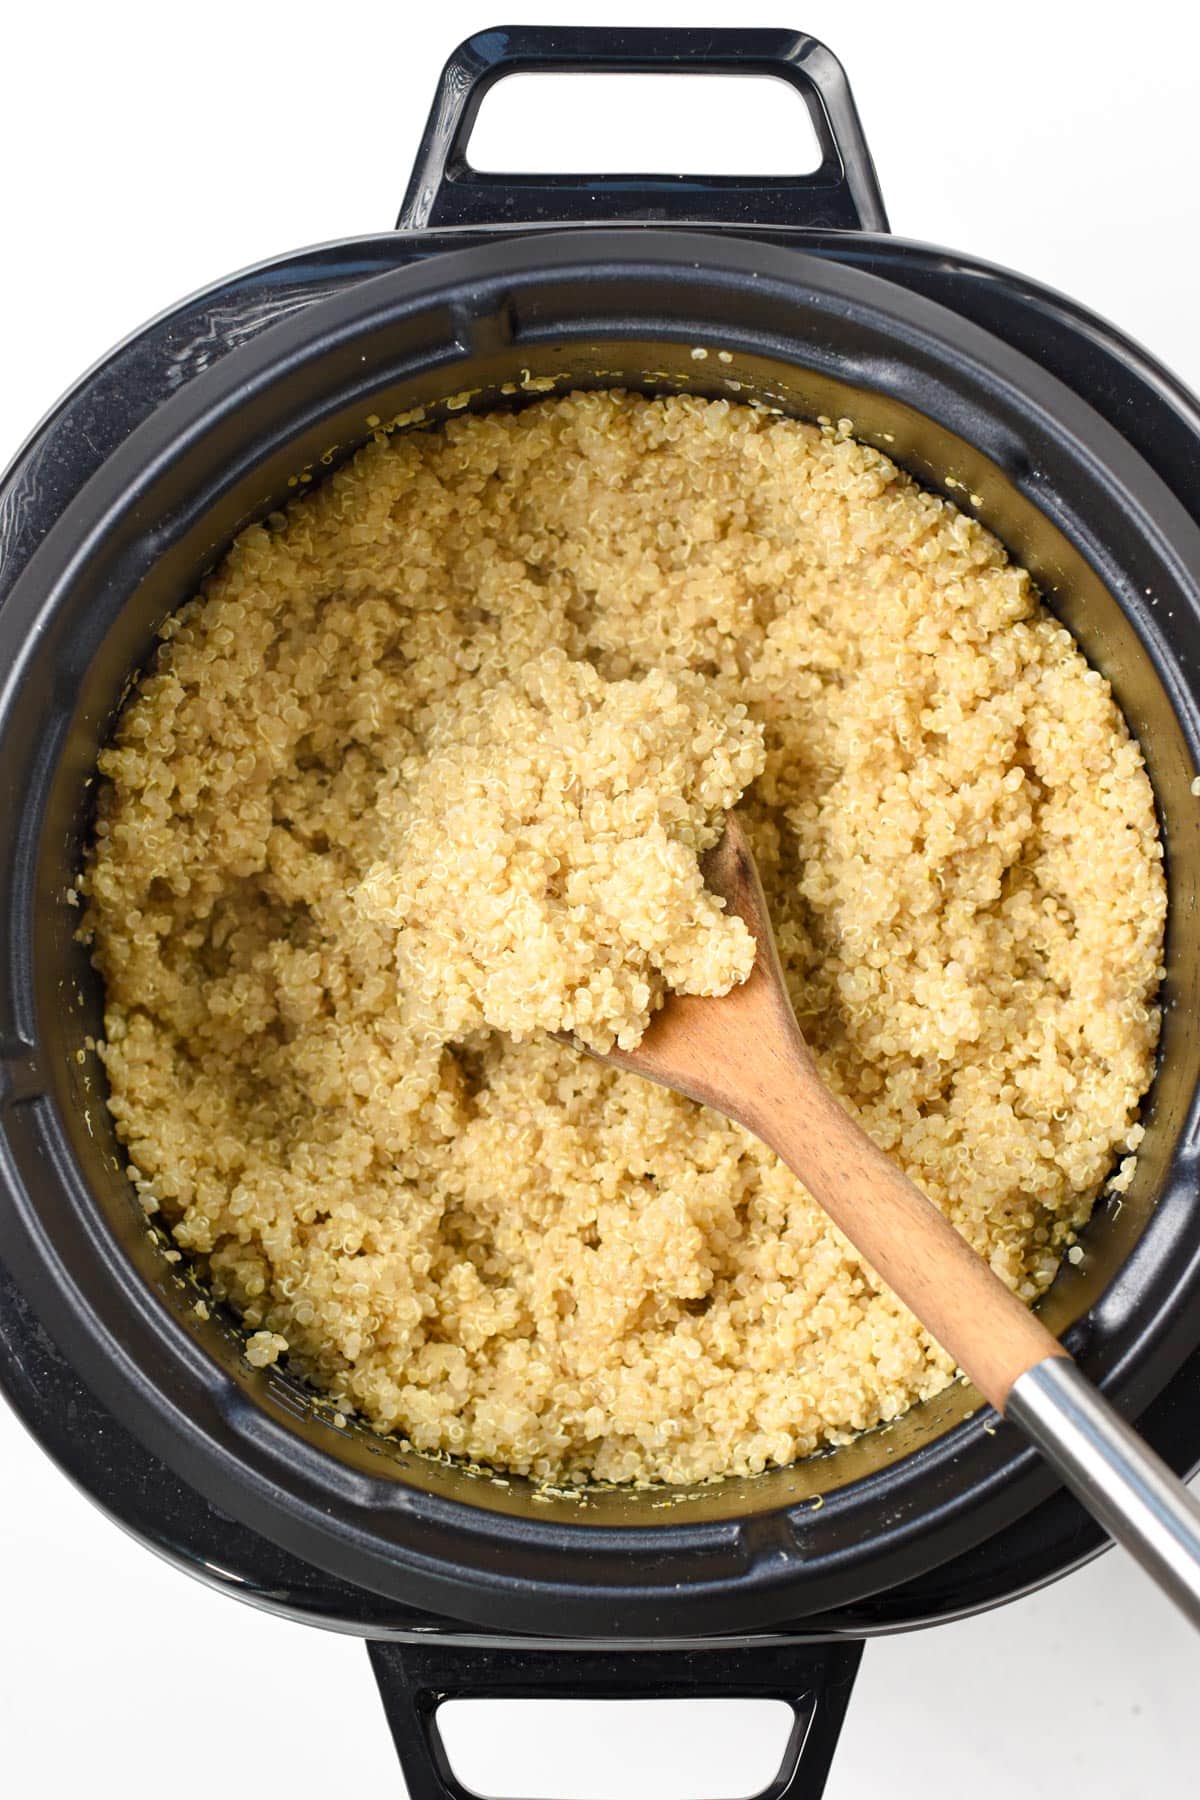 Cool Things You Can Make in a Rice Cooker, From Dessert to Breakfast